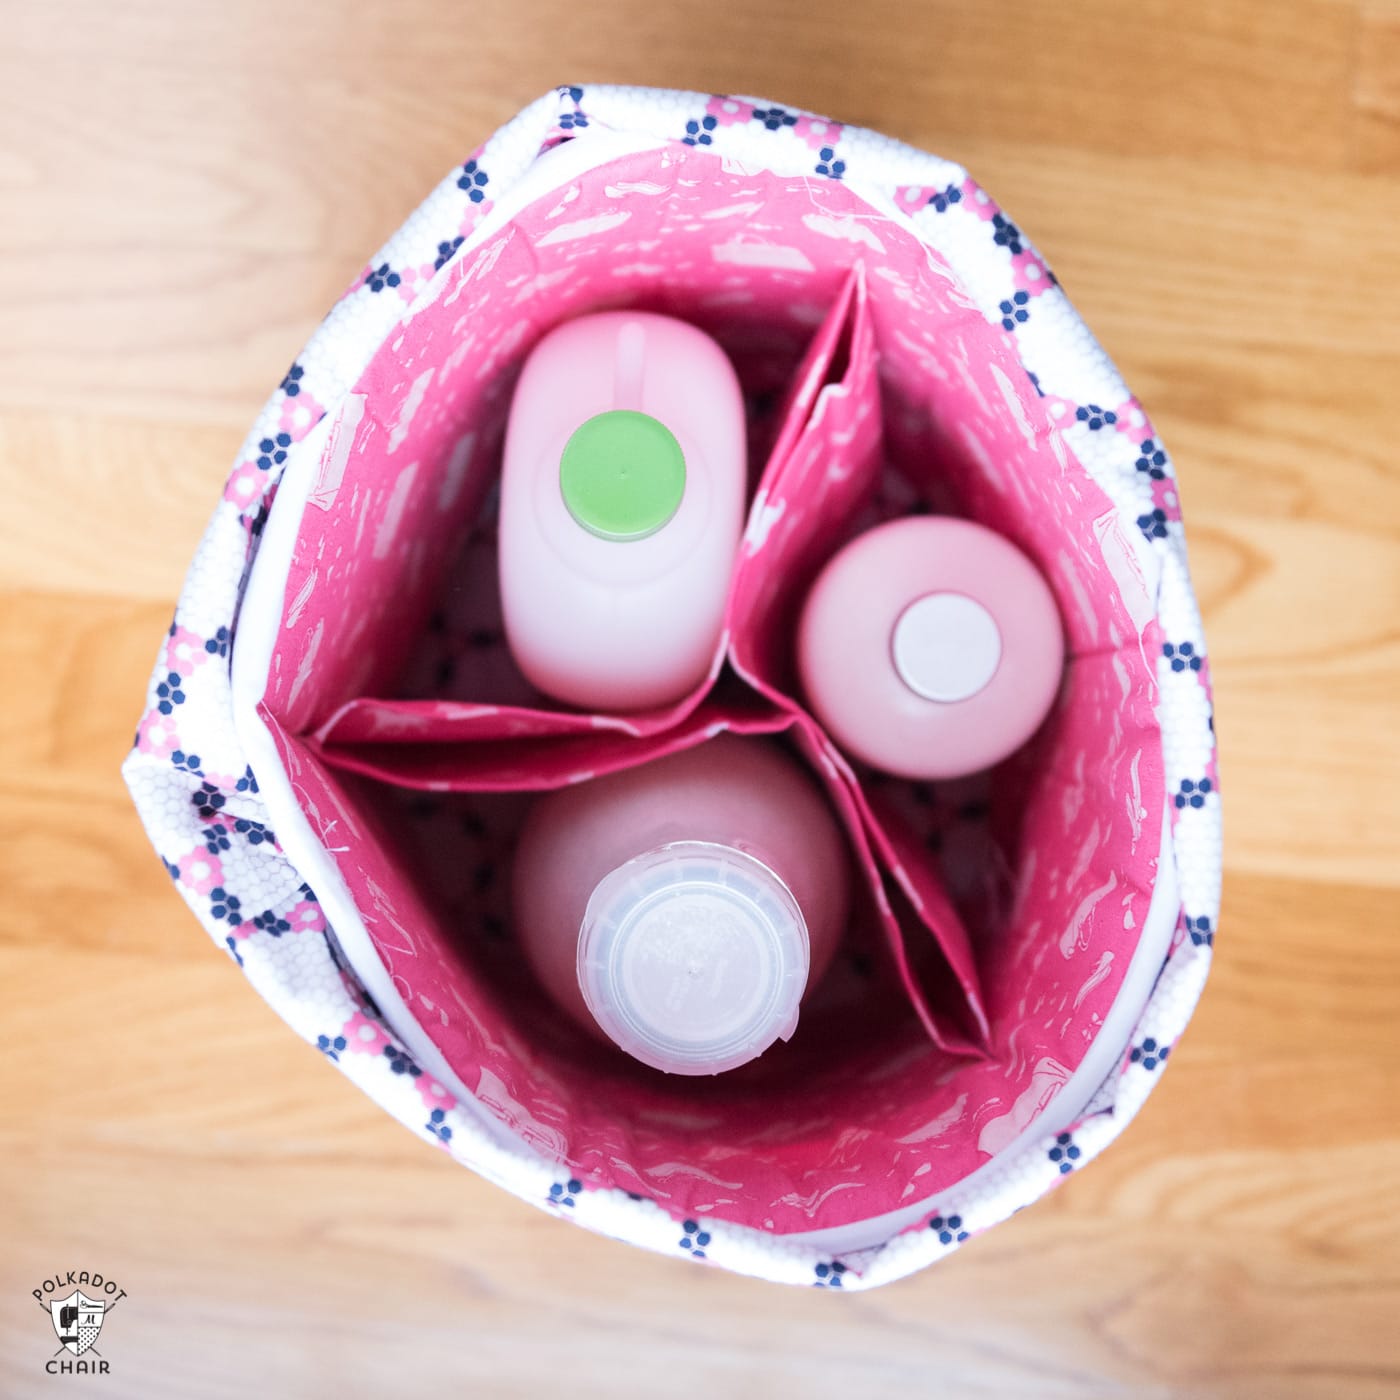 Learn how to make fabric storage bins with this sewing pattern. Round padded storage bins, great for organization projects! #fabricbins #fabricstorage #fabricbasket #sewingpattern #DIYBasket 